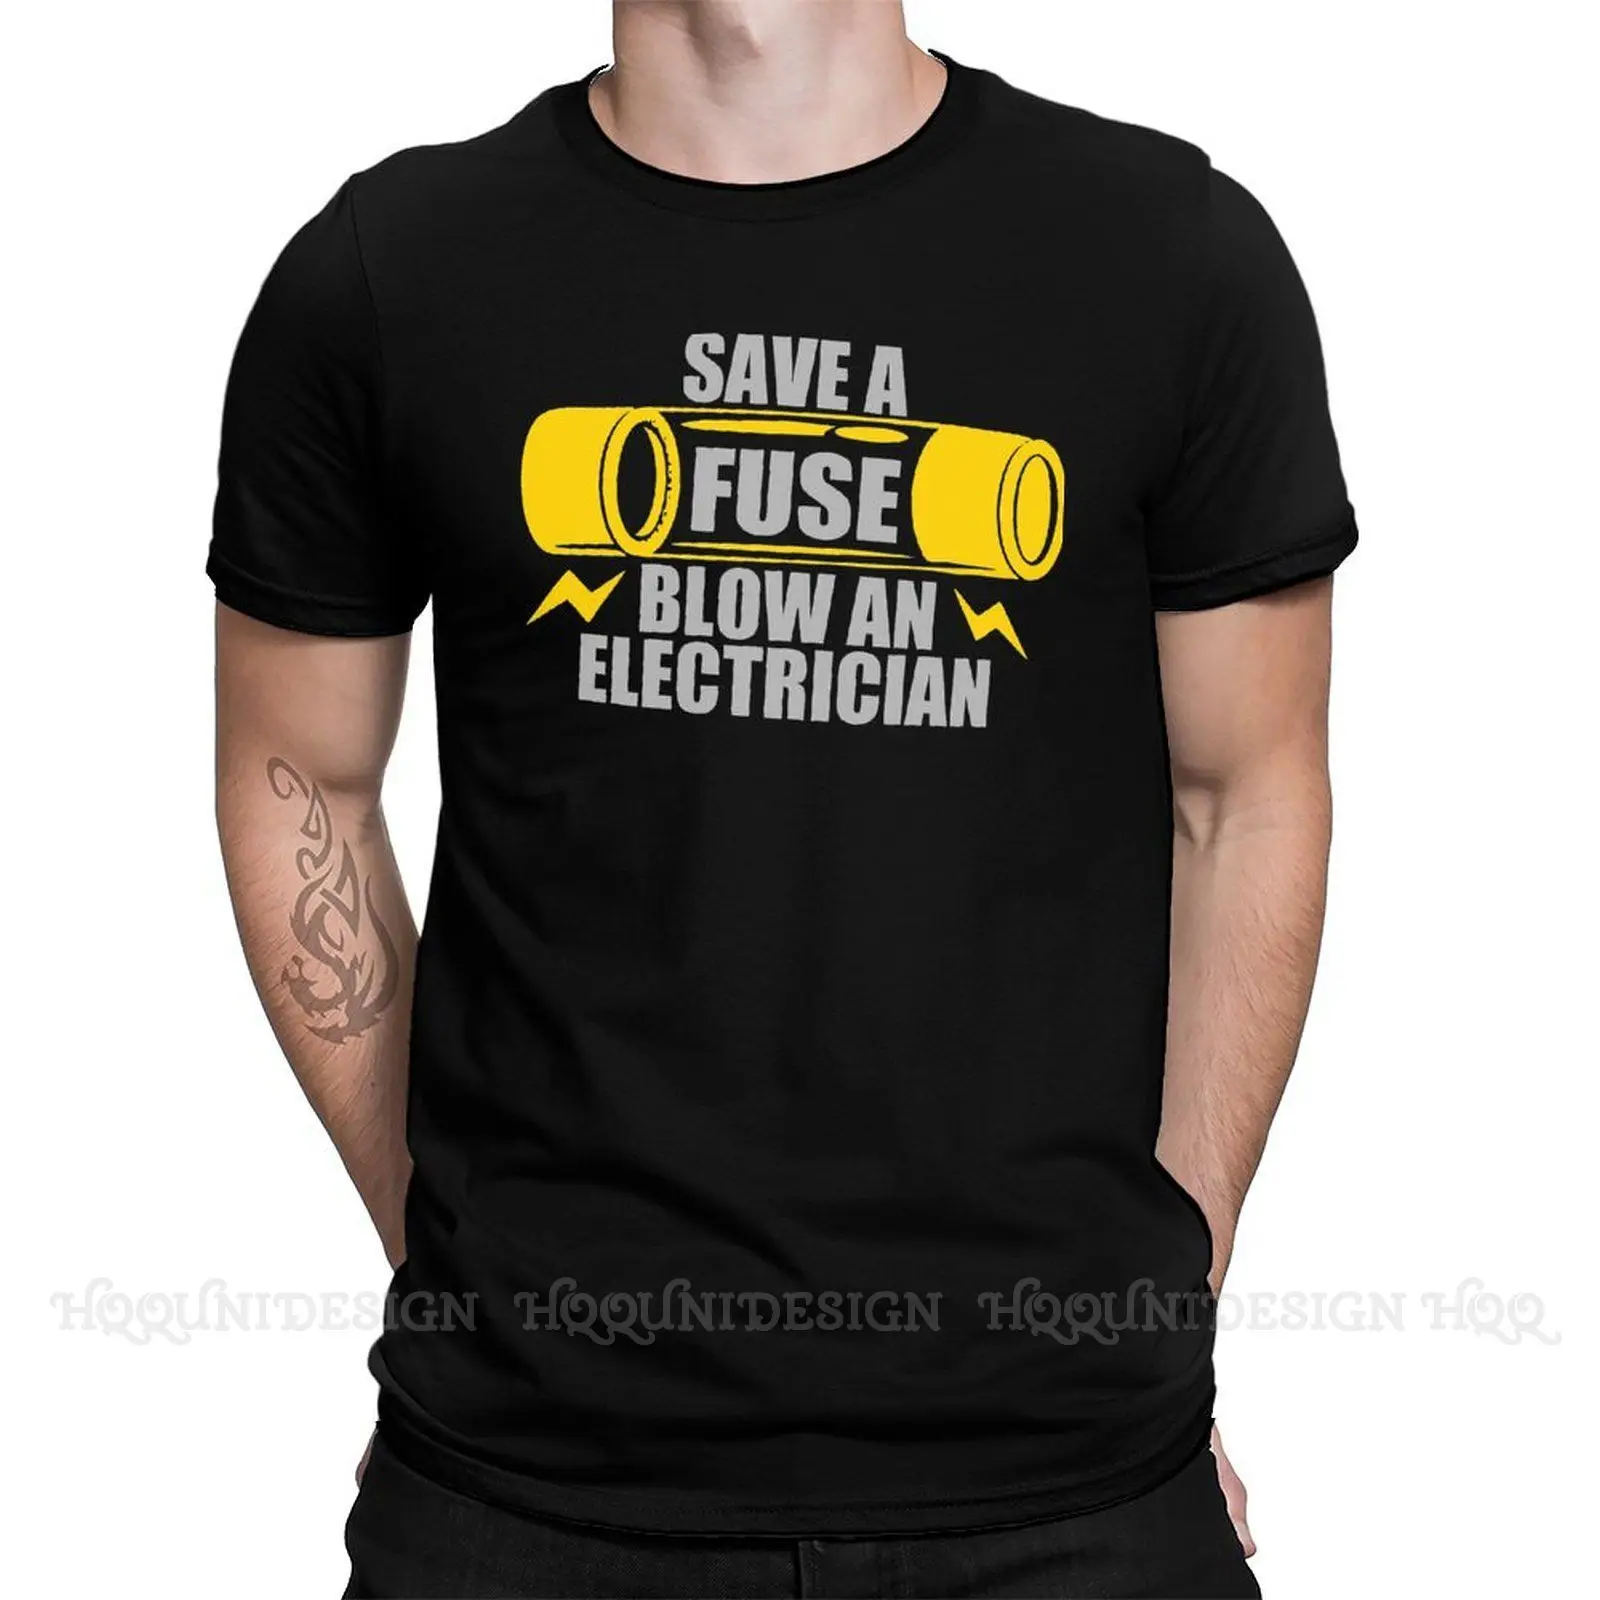 

Men T Shirts Electrician Electricity Engineer Funny Tee Shirt Save A Fuse Blow An Electrician Short Sleeve T-Shirt Pure Cotton